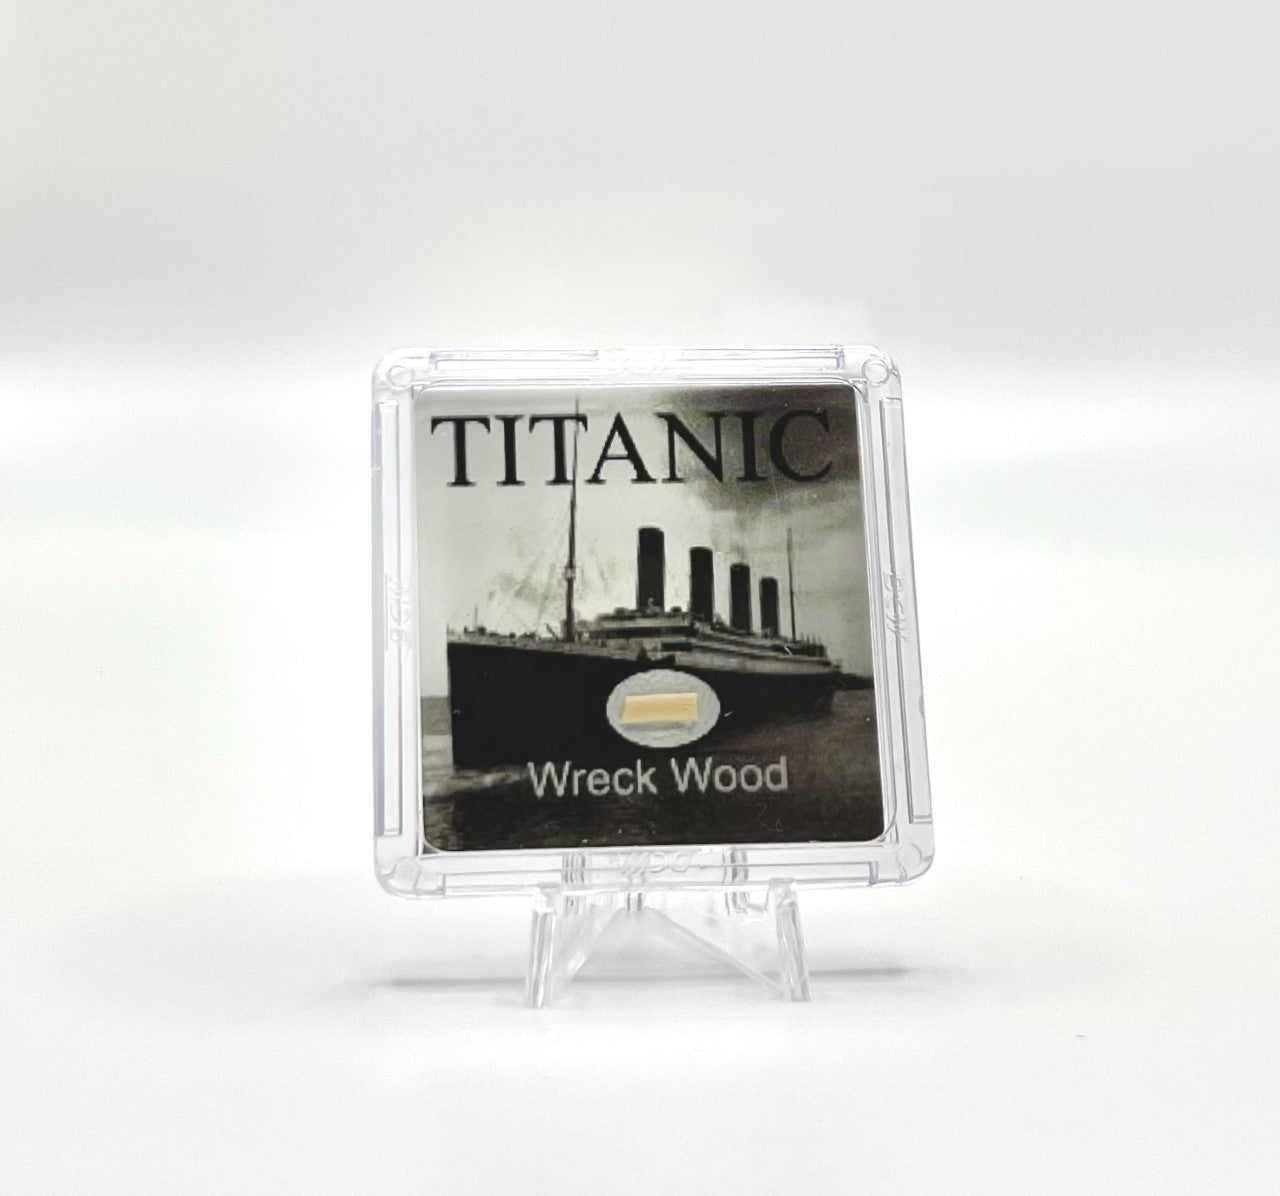 Titanic Wreck Wood in a Square Display with Stand